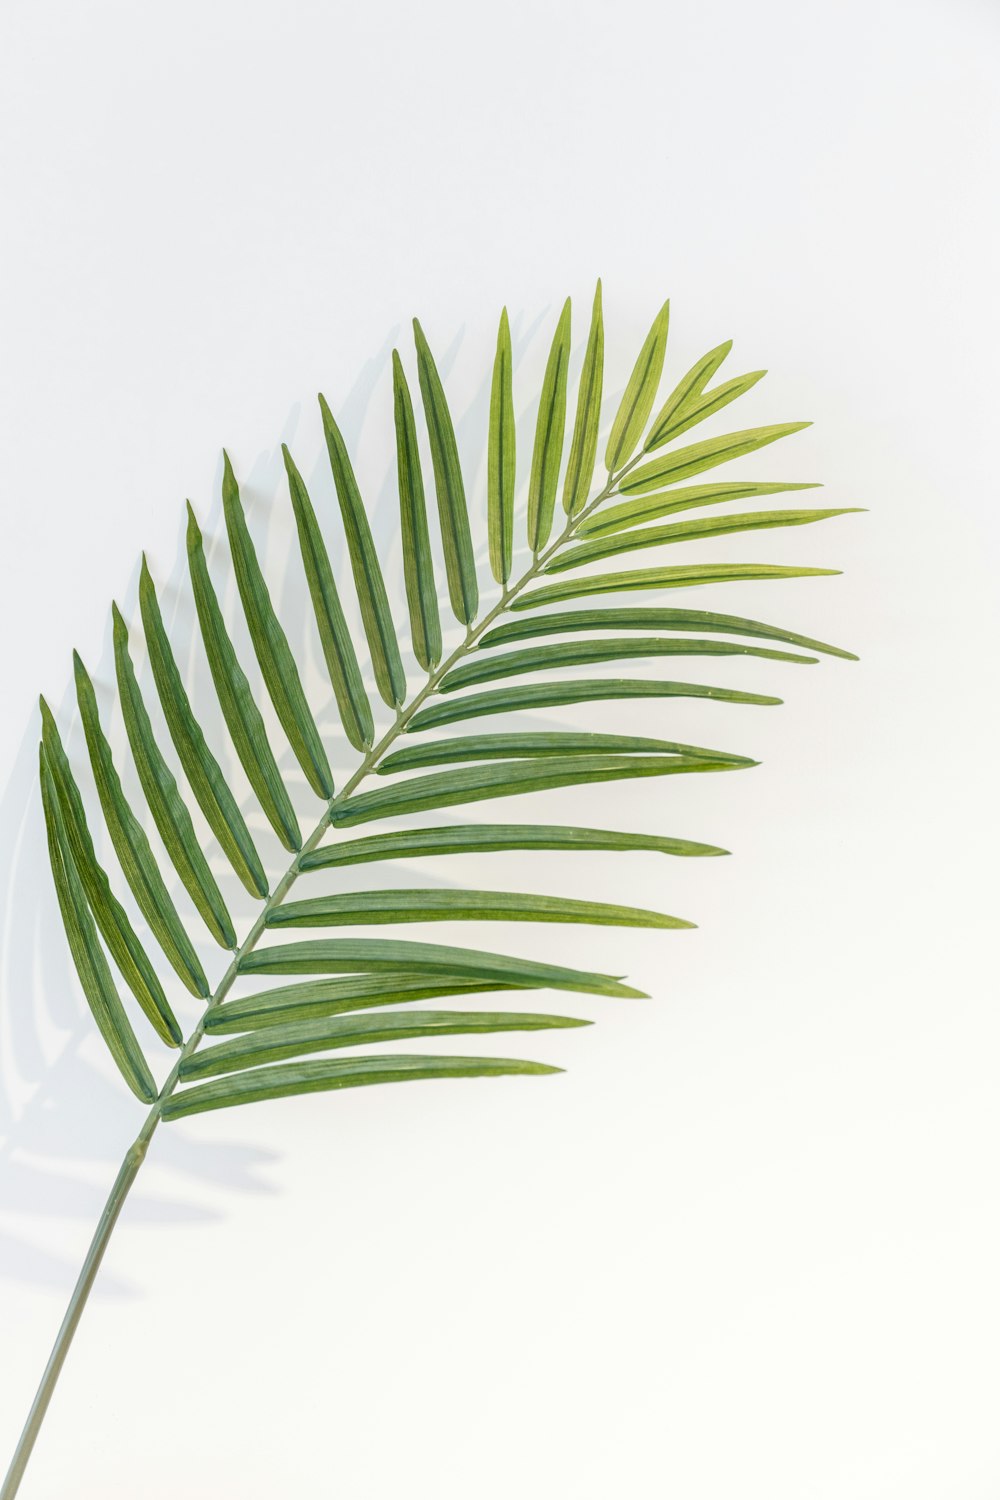 green leaf plant in white background